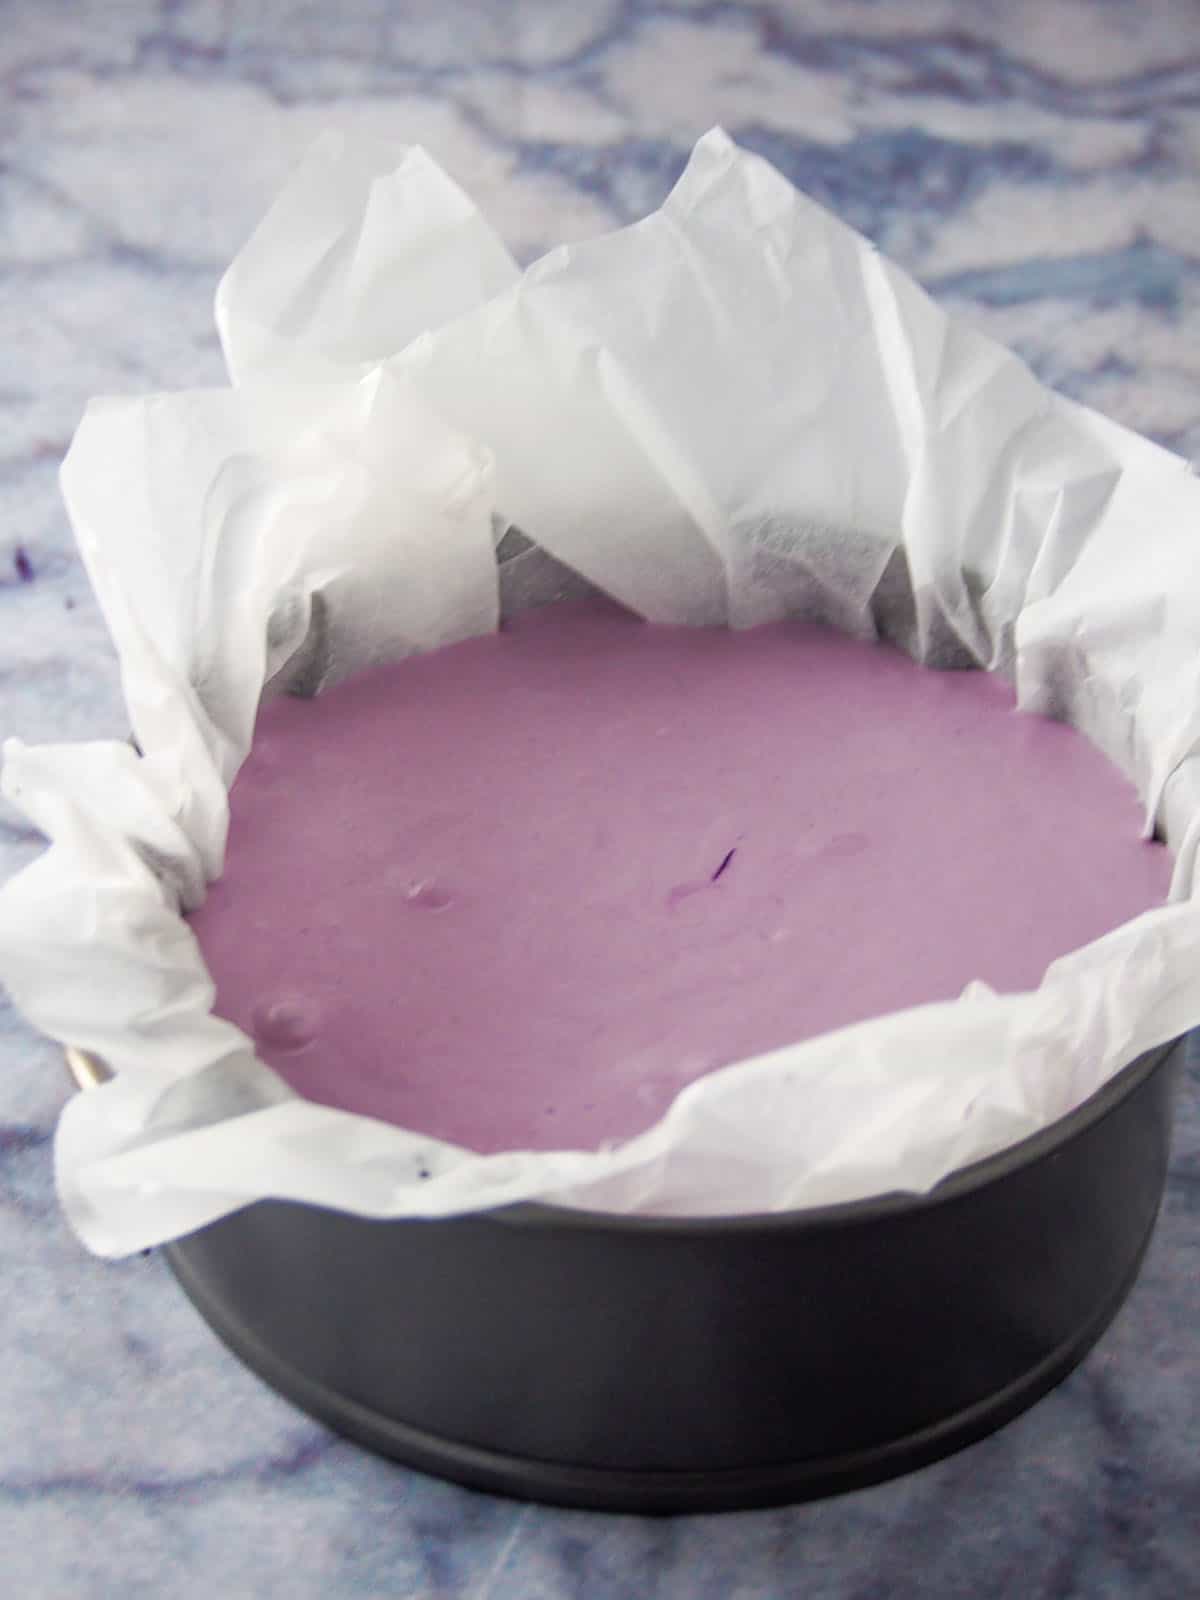 Ube basque cheesecake on a pan, ready for baking.